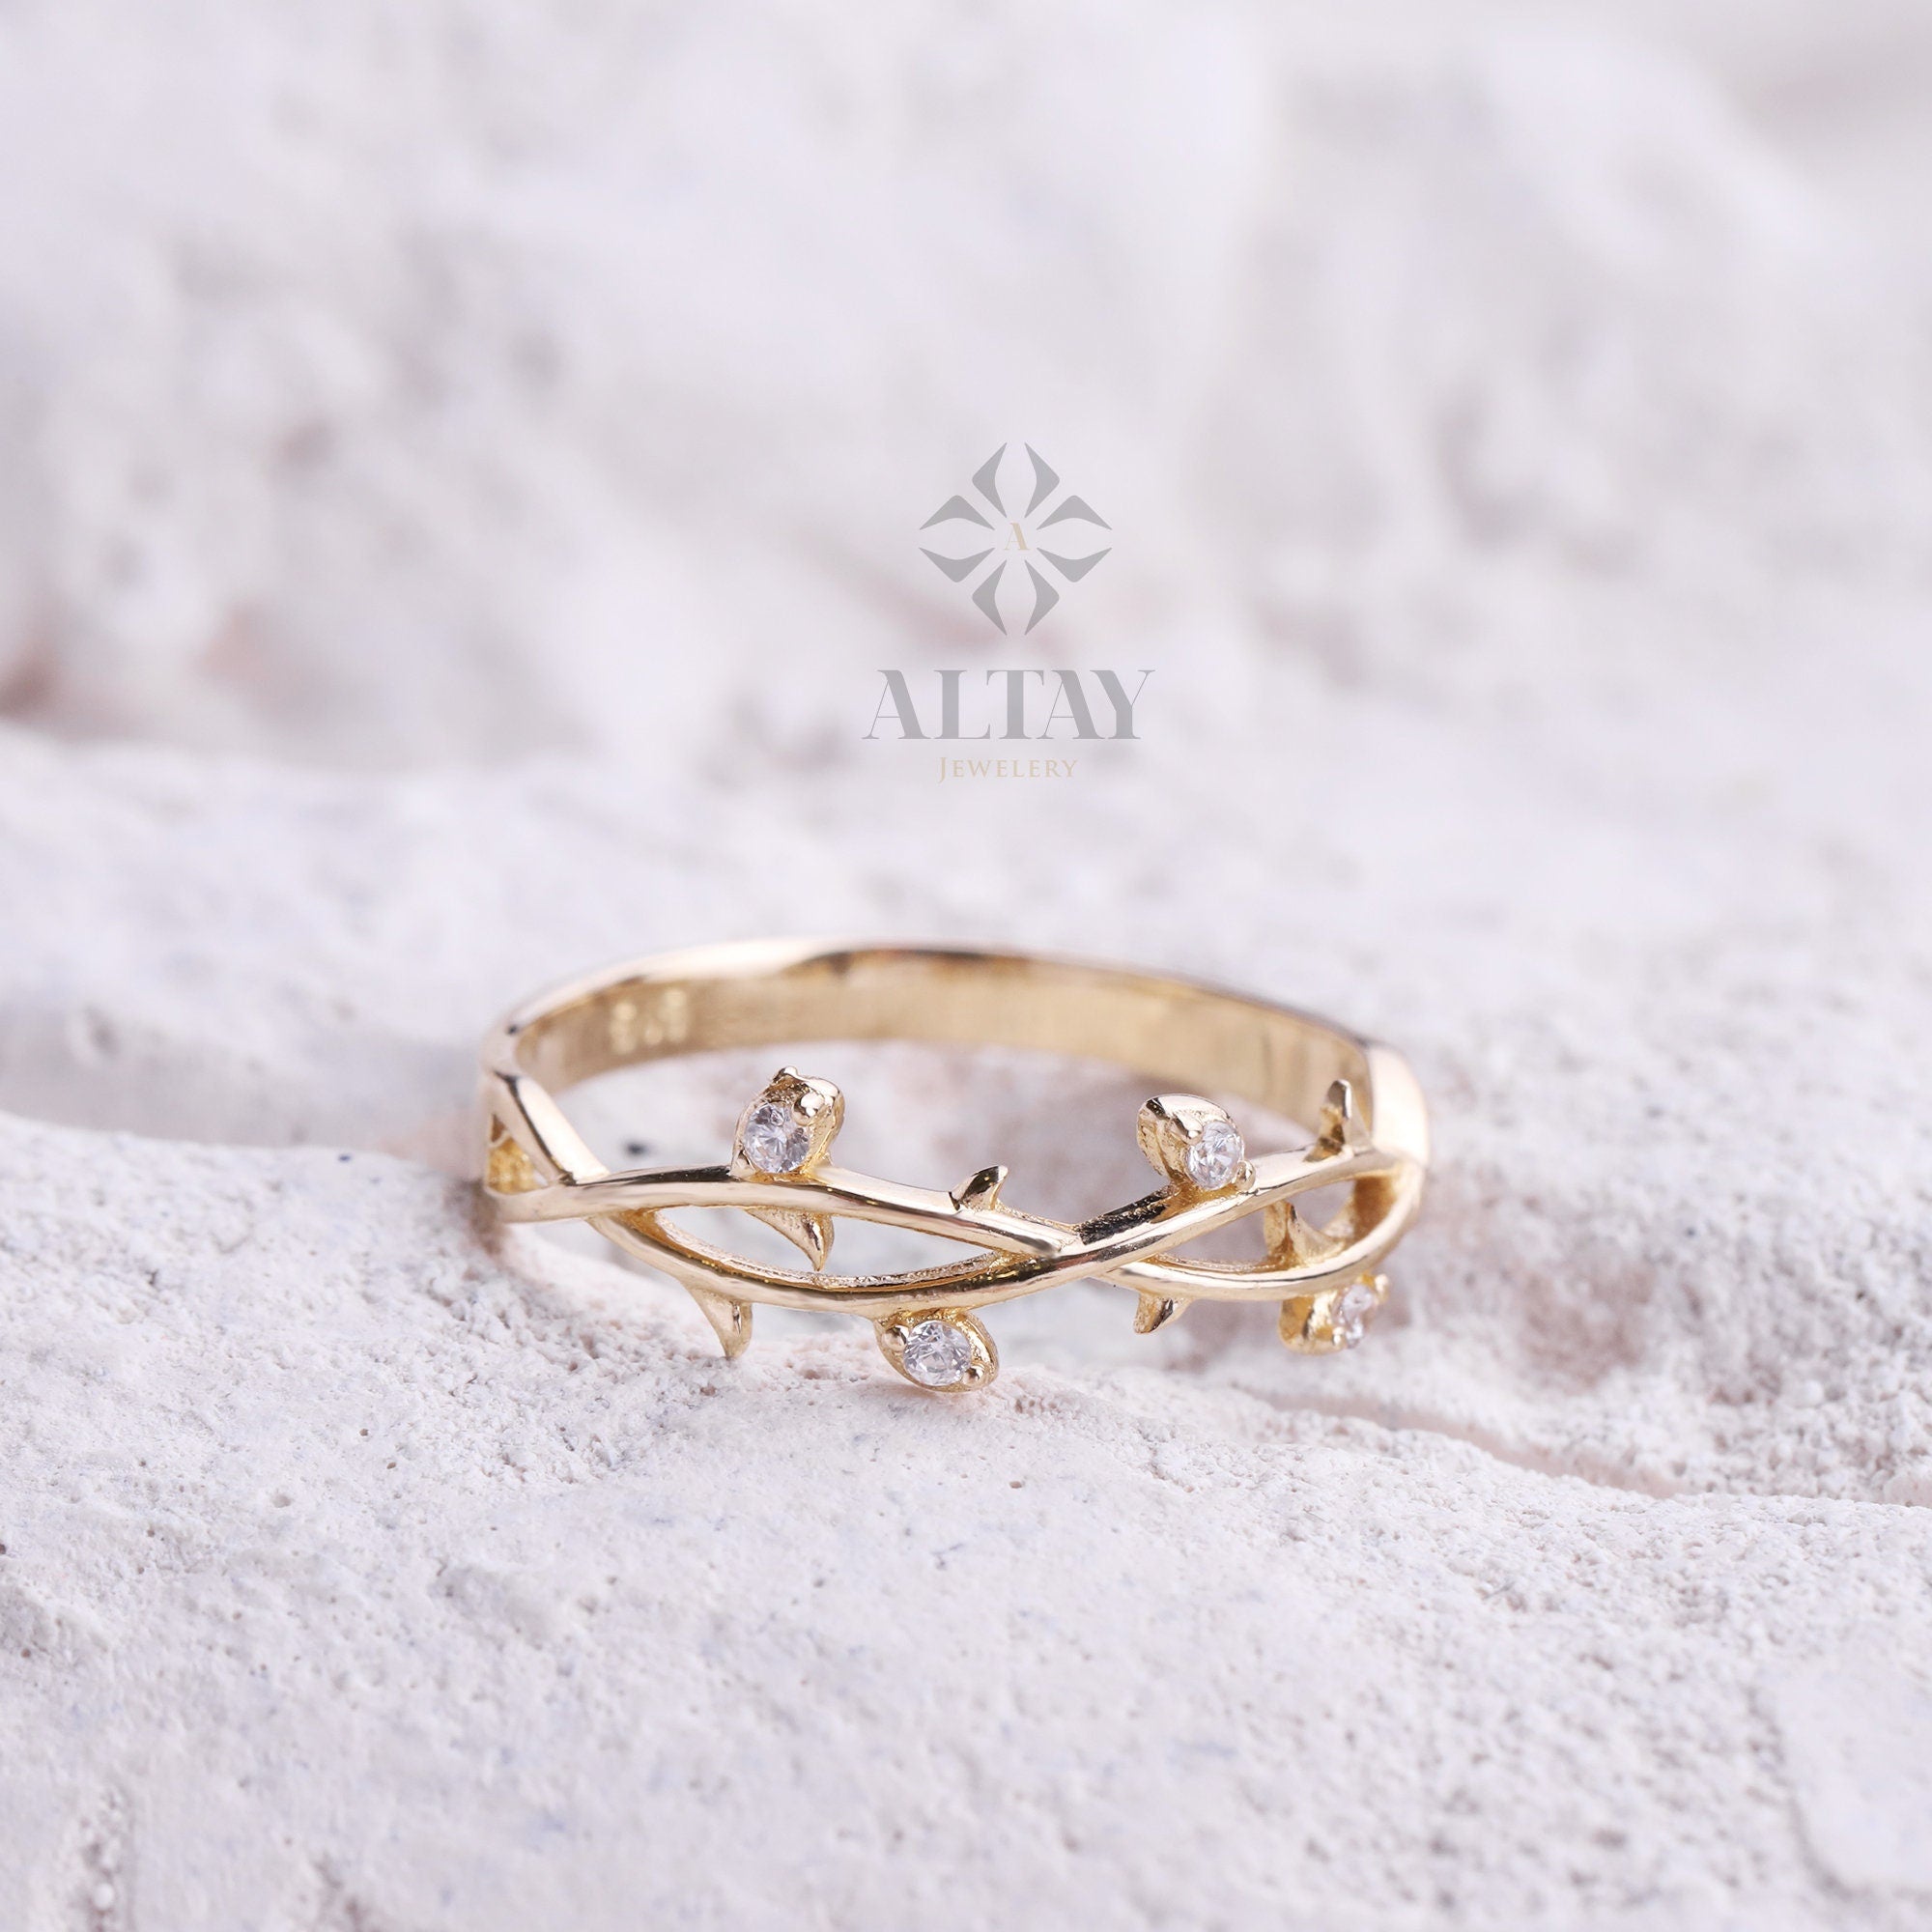 14K Gold Leaf Branch Ring, Gold Leaf Twig Ring, Gold Vine Ring, Layering Ring, Vine Ring, Laurel Ring, Nature Jewelry, Tree Ring, Gift